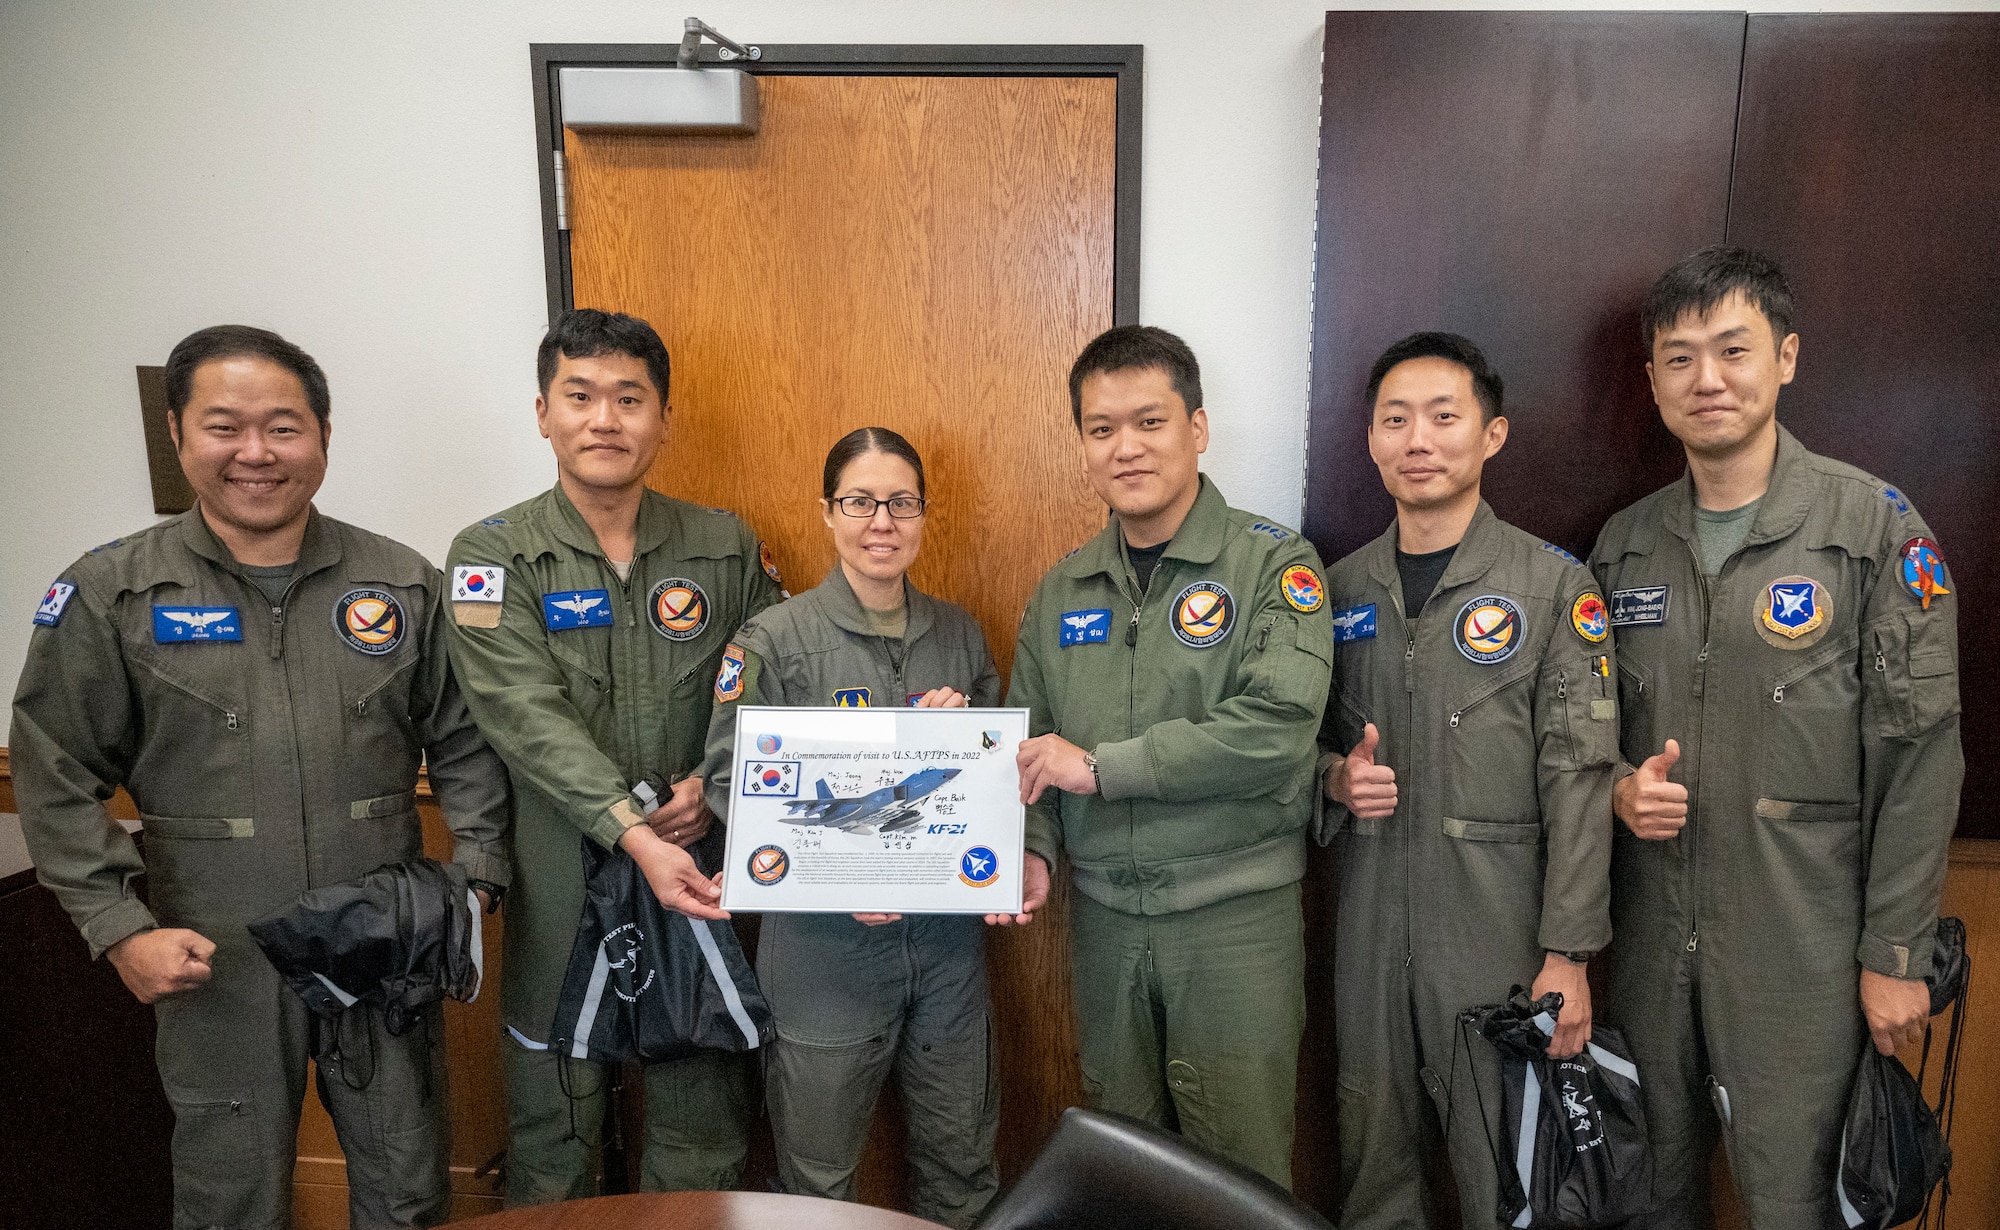 Col. Sebrina Pabon, Commandant, U.S. Air Force Test Pilot School presents a Commemoration of Visit certificate to the Republic of Korean Air Force (ROKAF) team after a successful technical exchange.